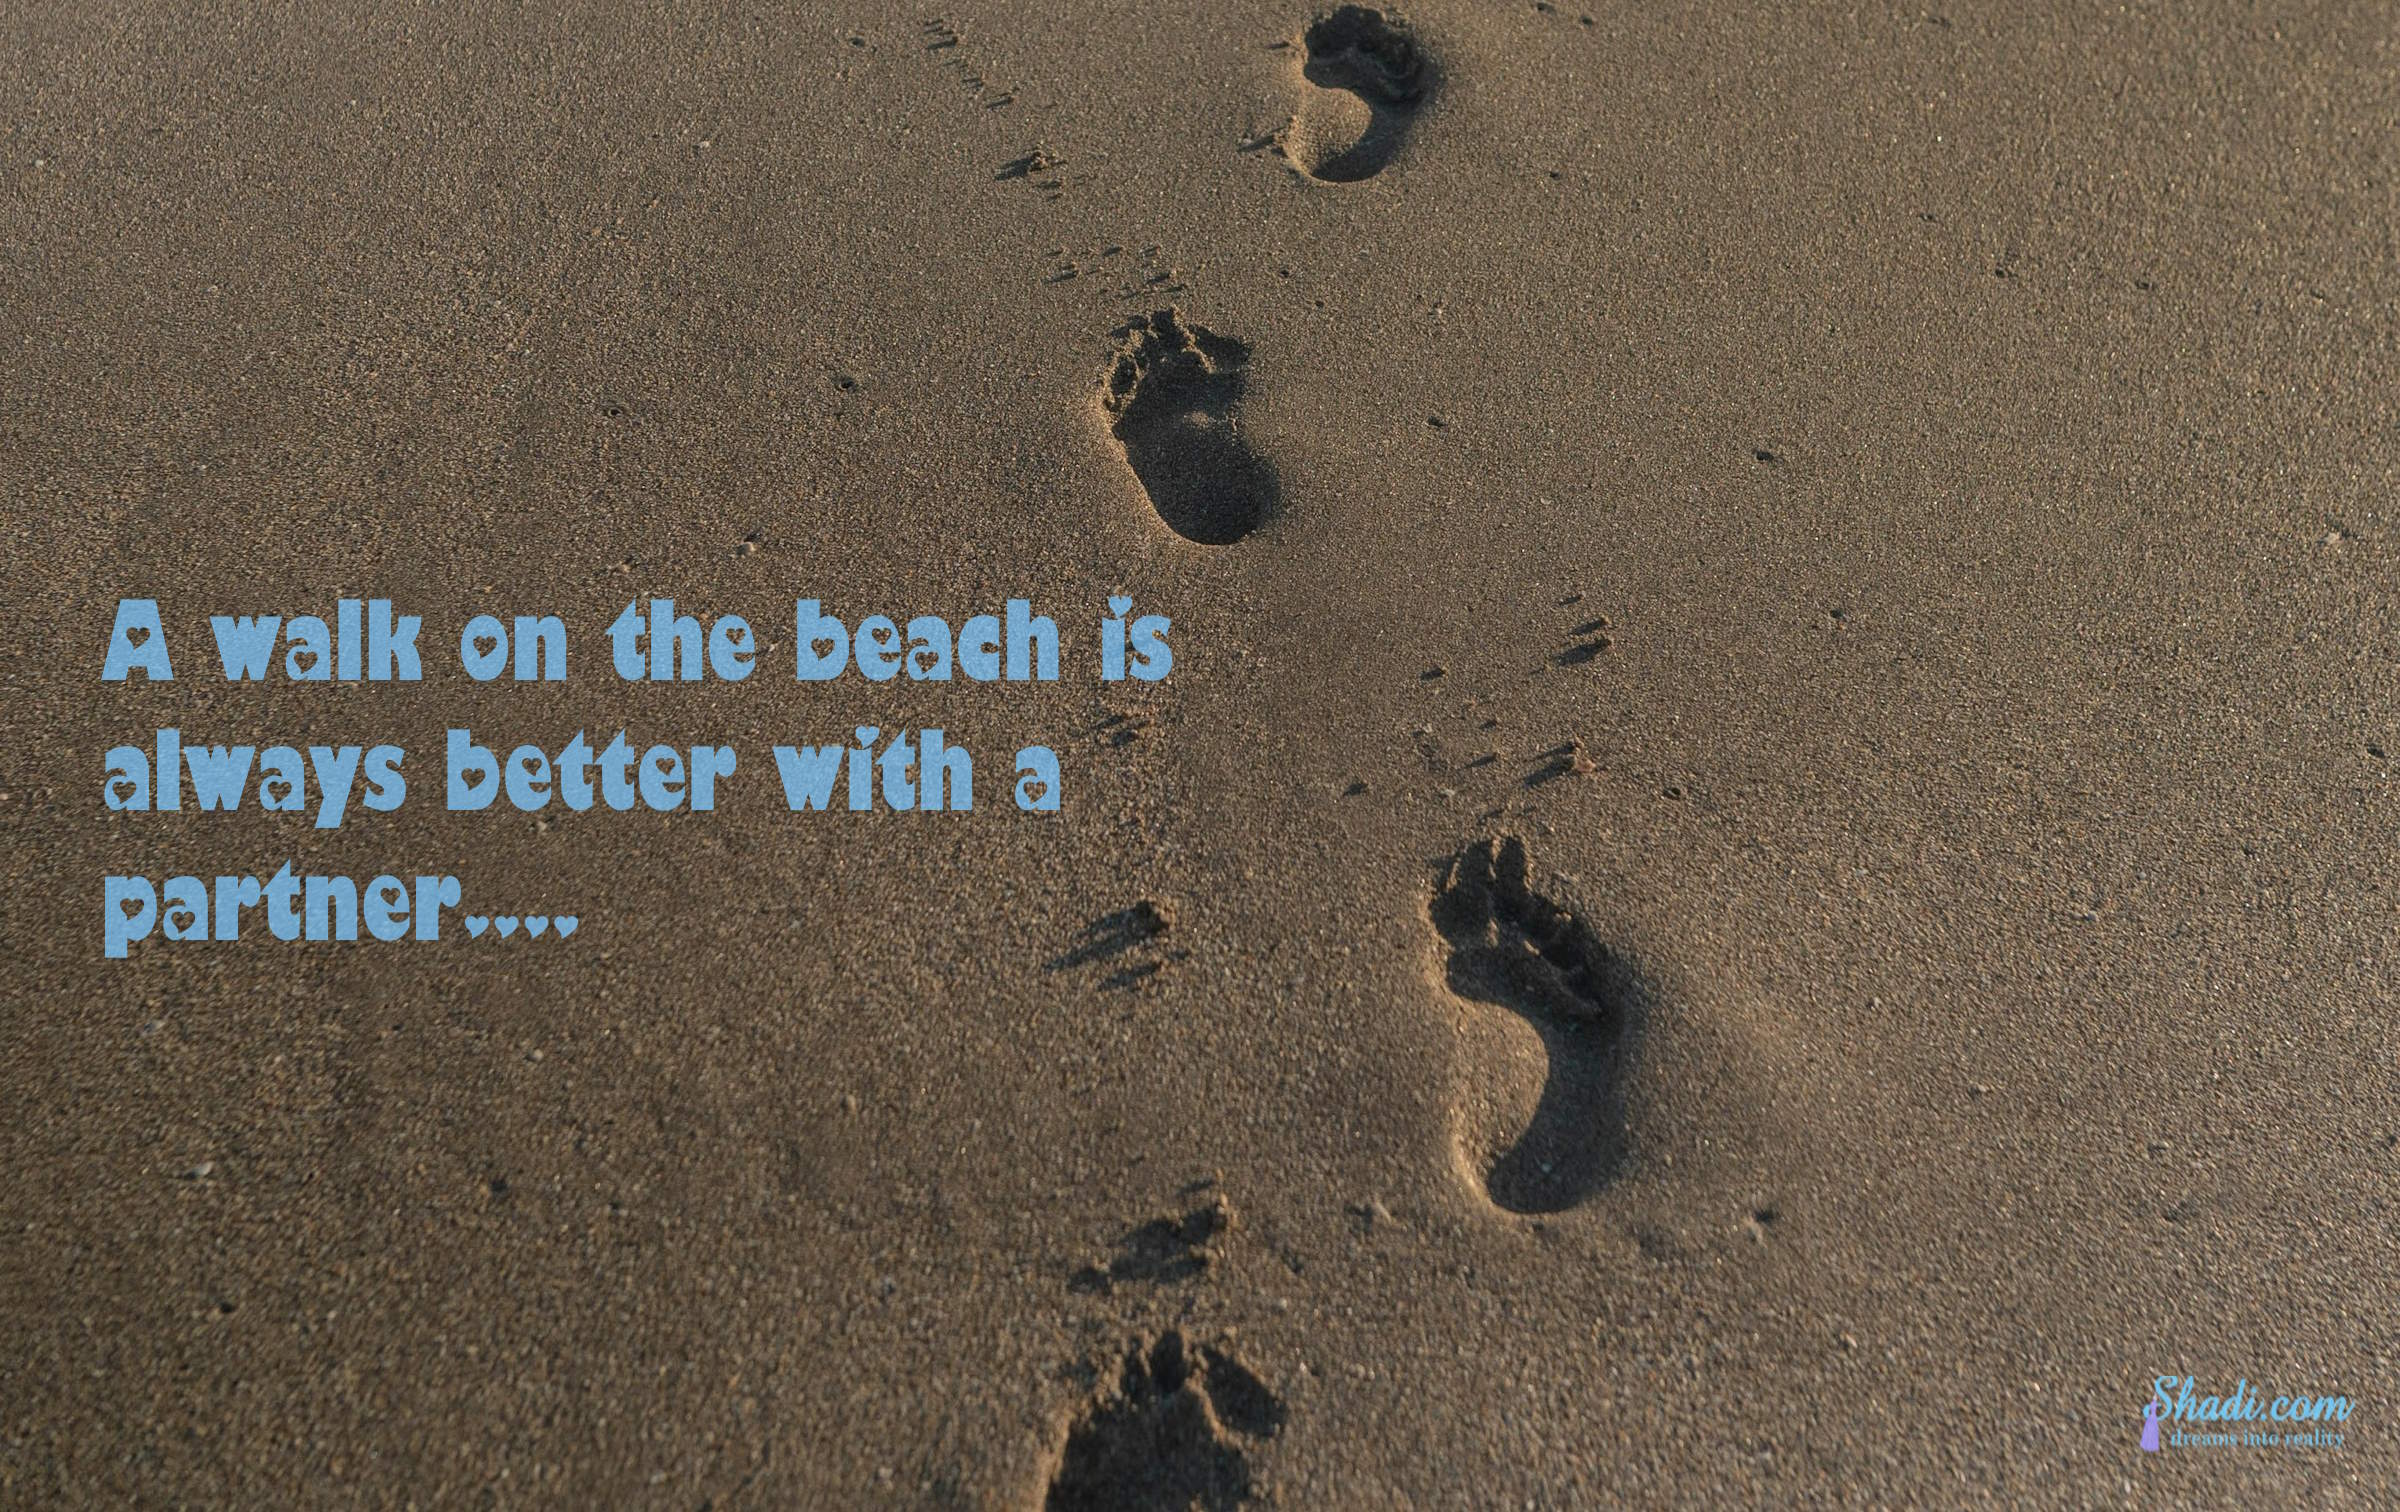 A walk on the beach in better with a partner